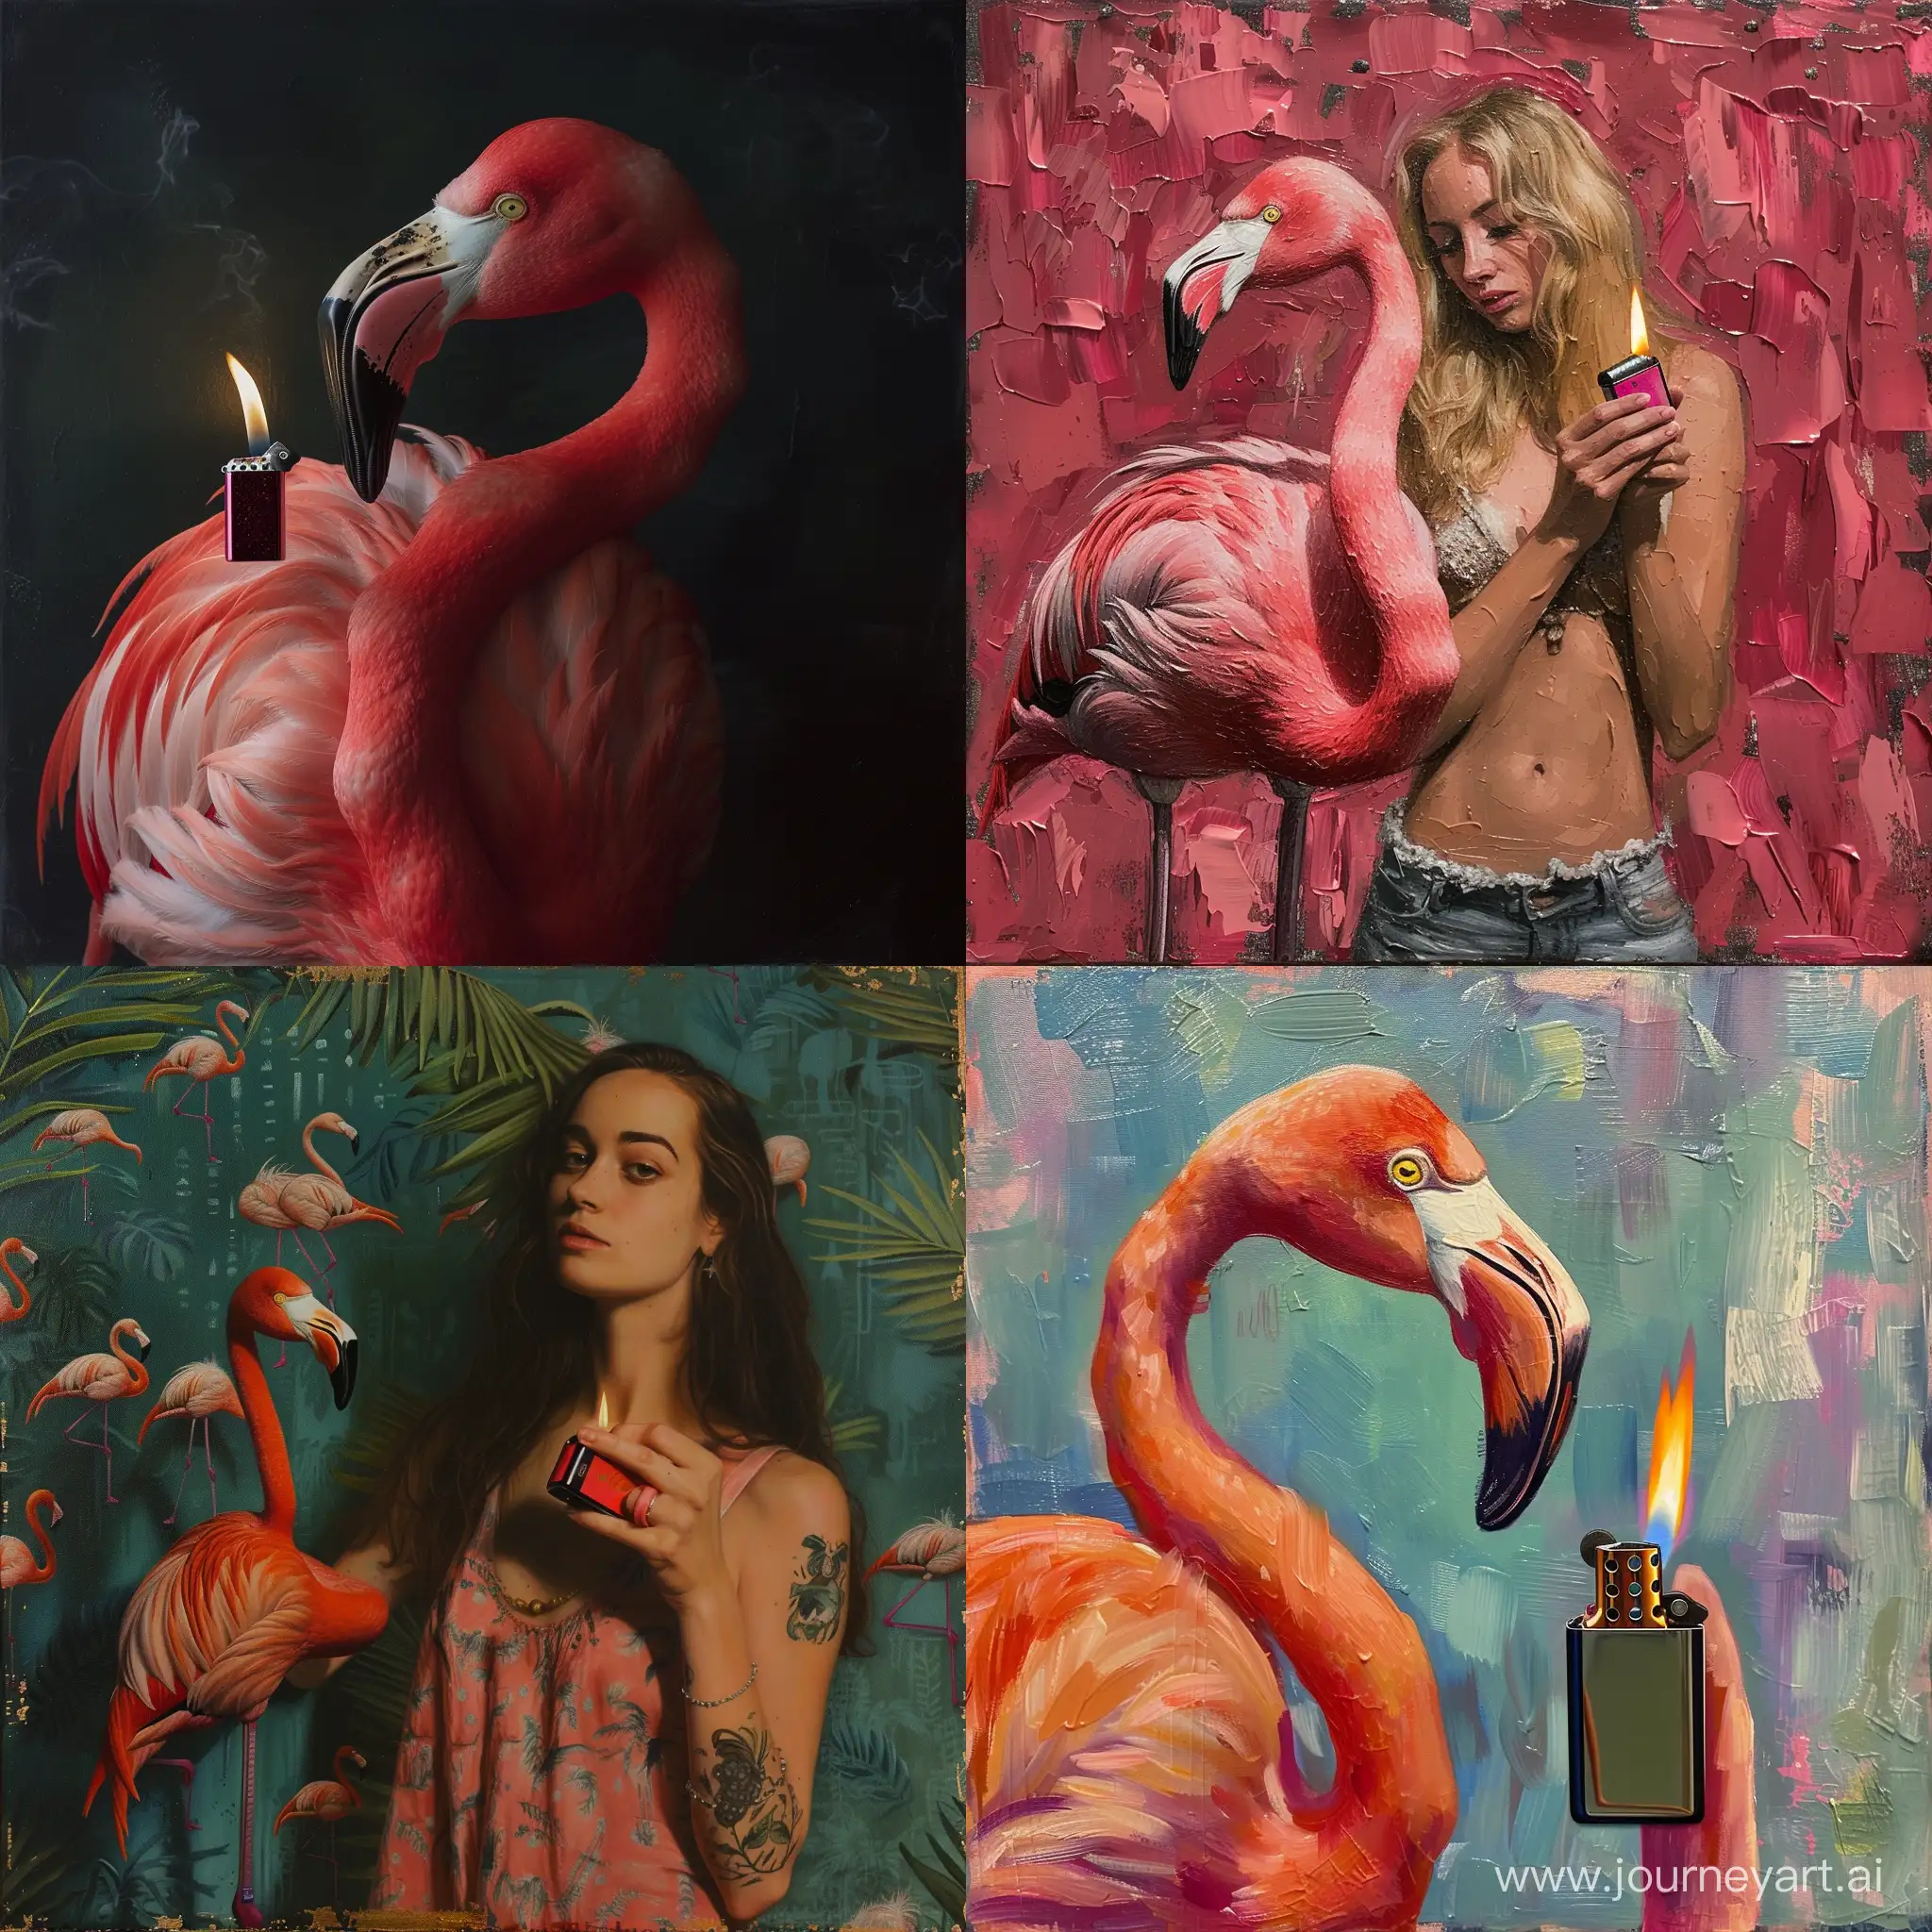 Flamingo but a lighter on her hand